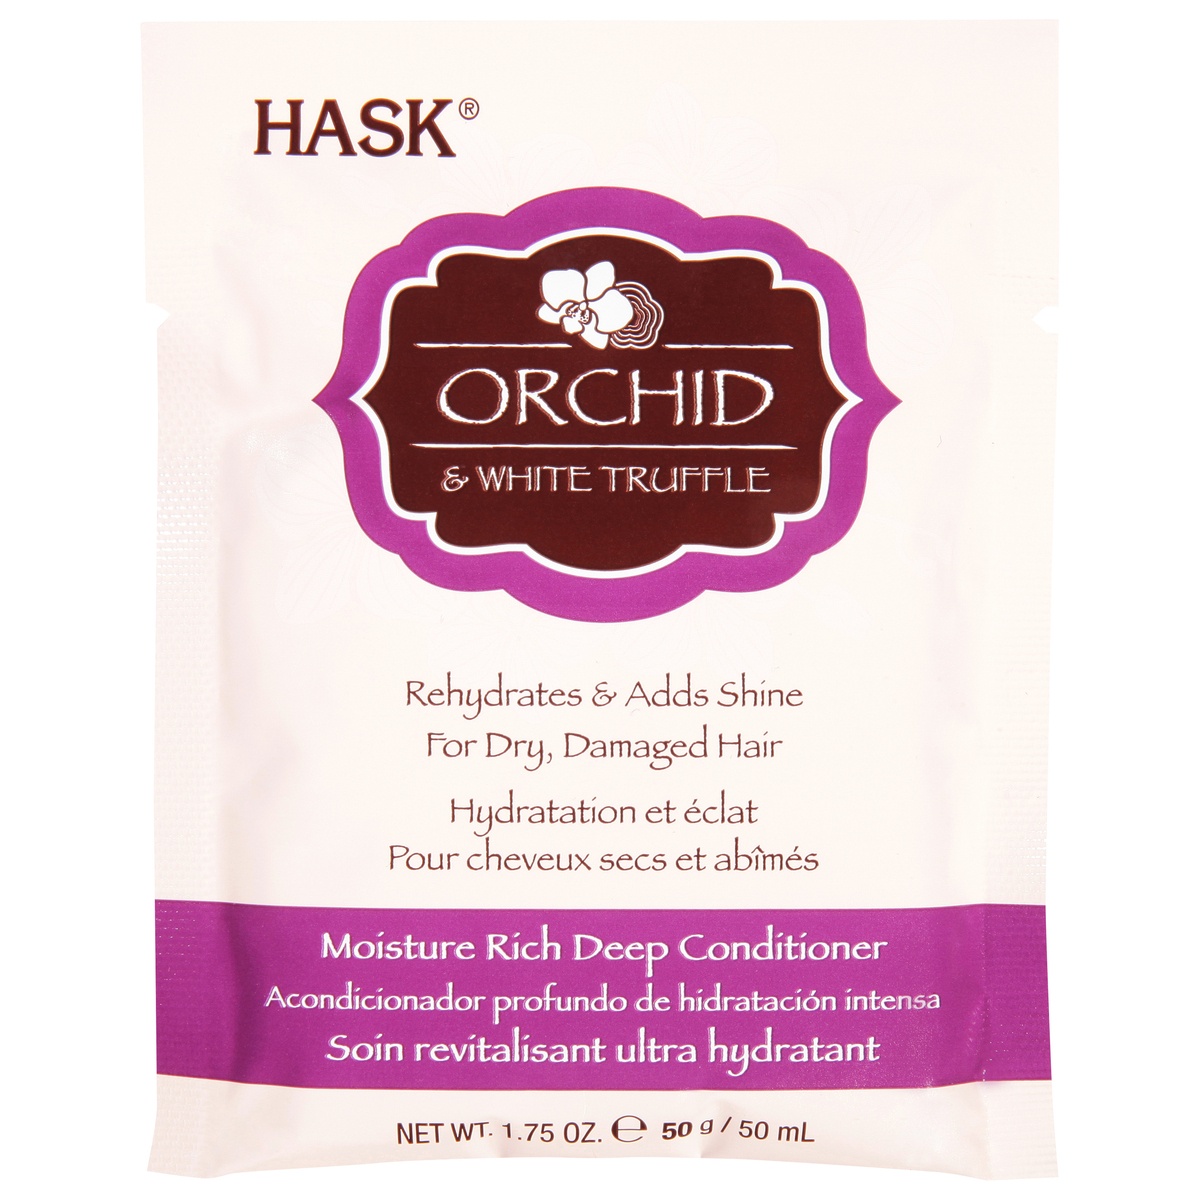 slide 1 of 10, Hask Orchid White Truffle Moisture Rich Deep Conditioner, 1.75 oz